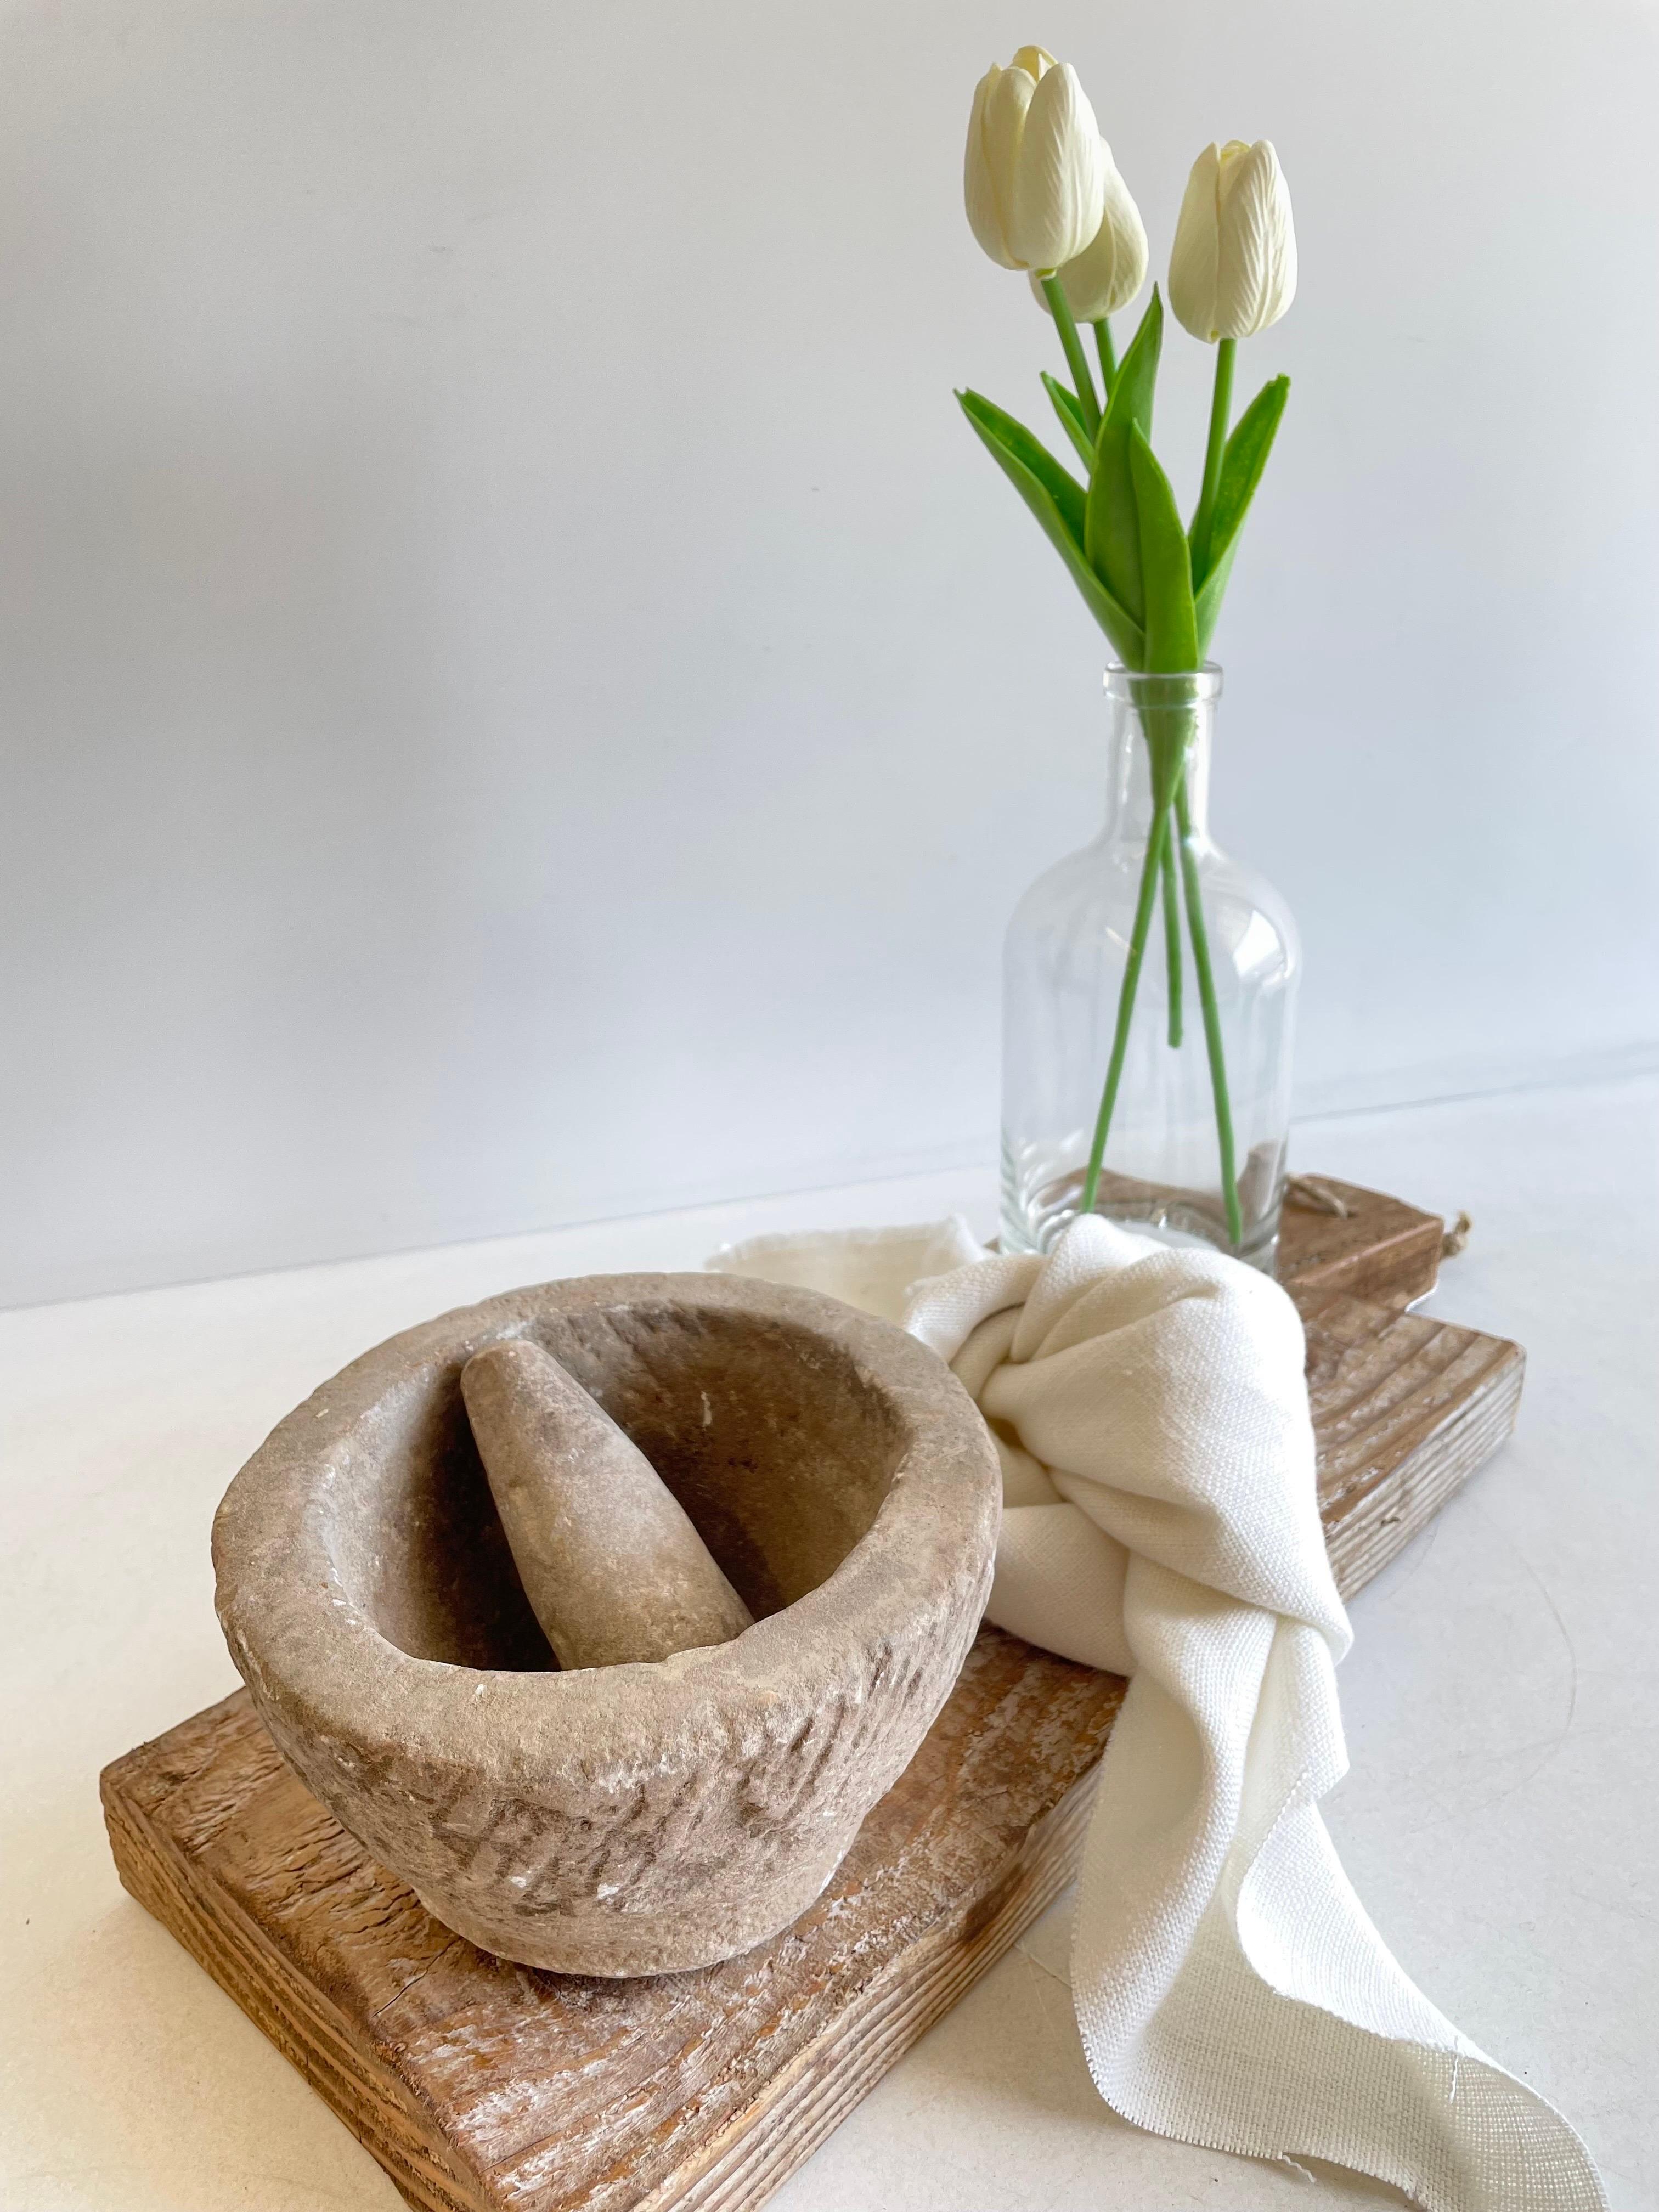 Antique stone mortar and pestle bowl set, great decorative item, or can be used.
Accessories not included
Size: 4” H x 6 1/2” D x 4 1/2” O.